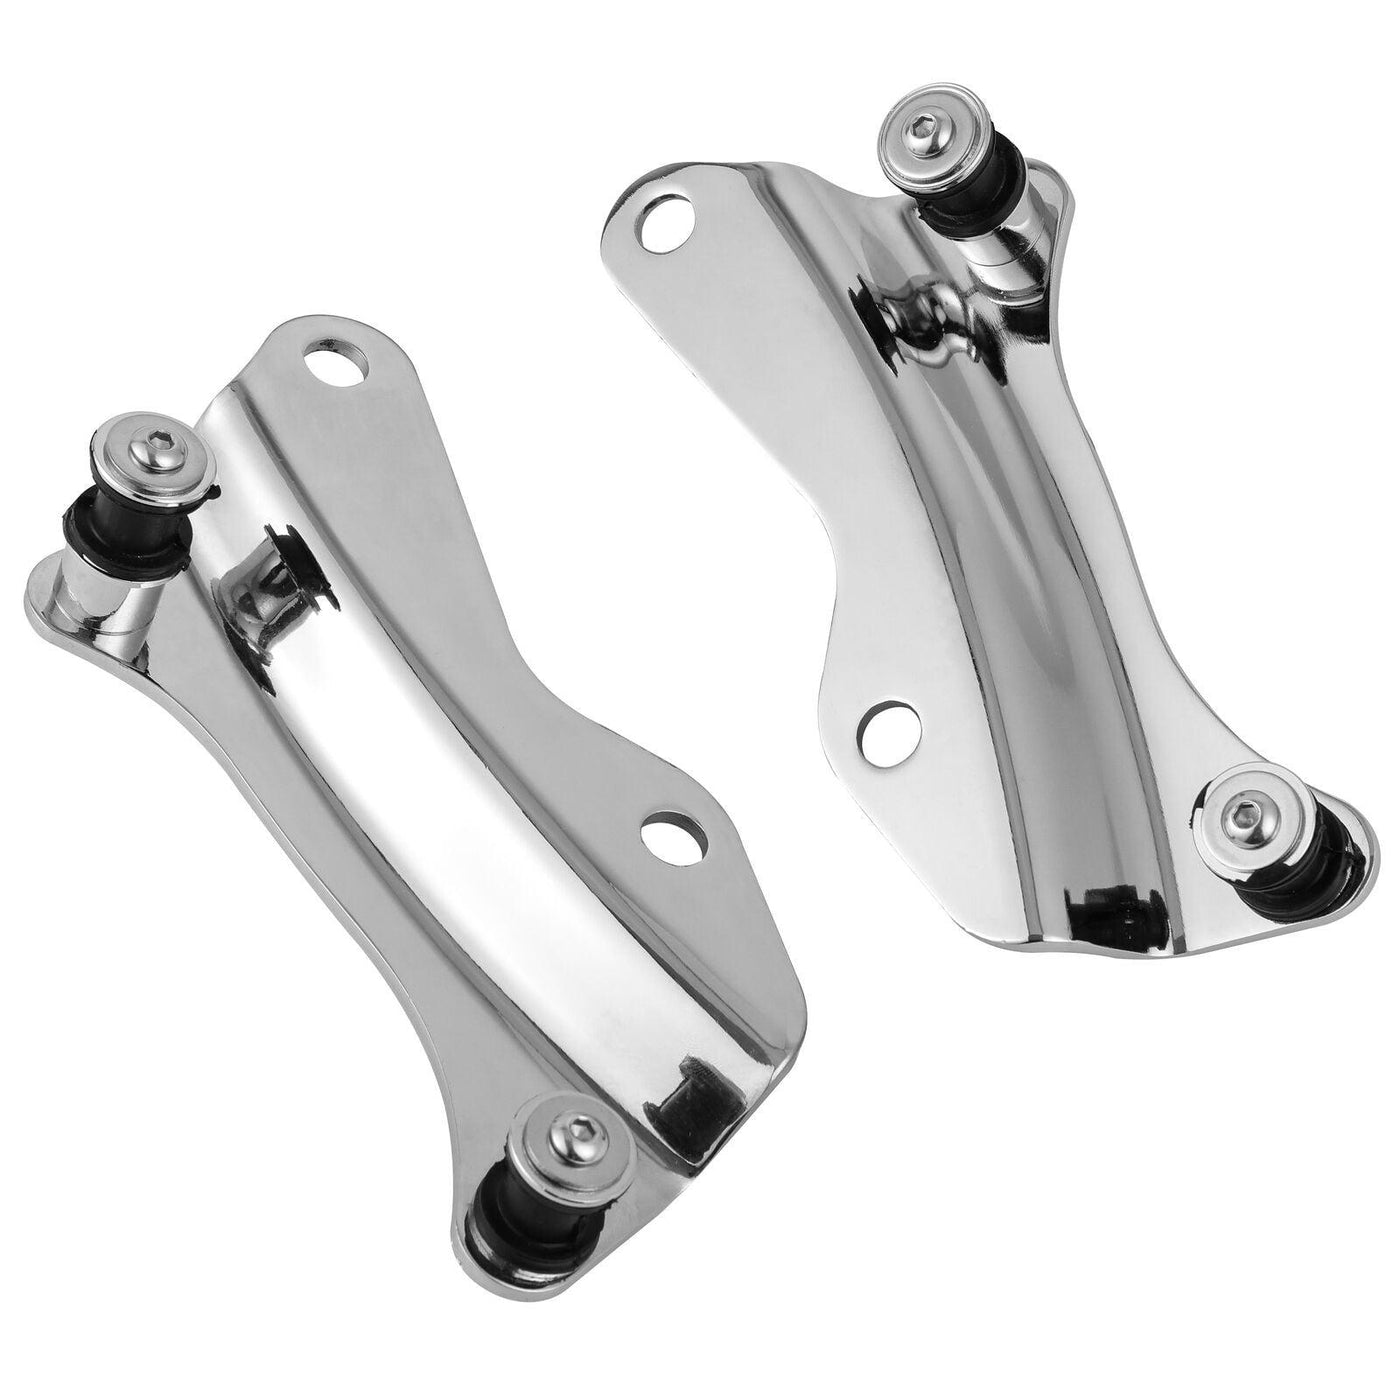 Chrome 4 Point Docking Hardware Kit For Harley Road King Street Glide 14-21 - Moto Life Products